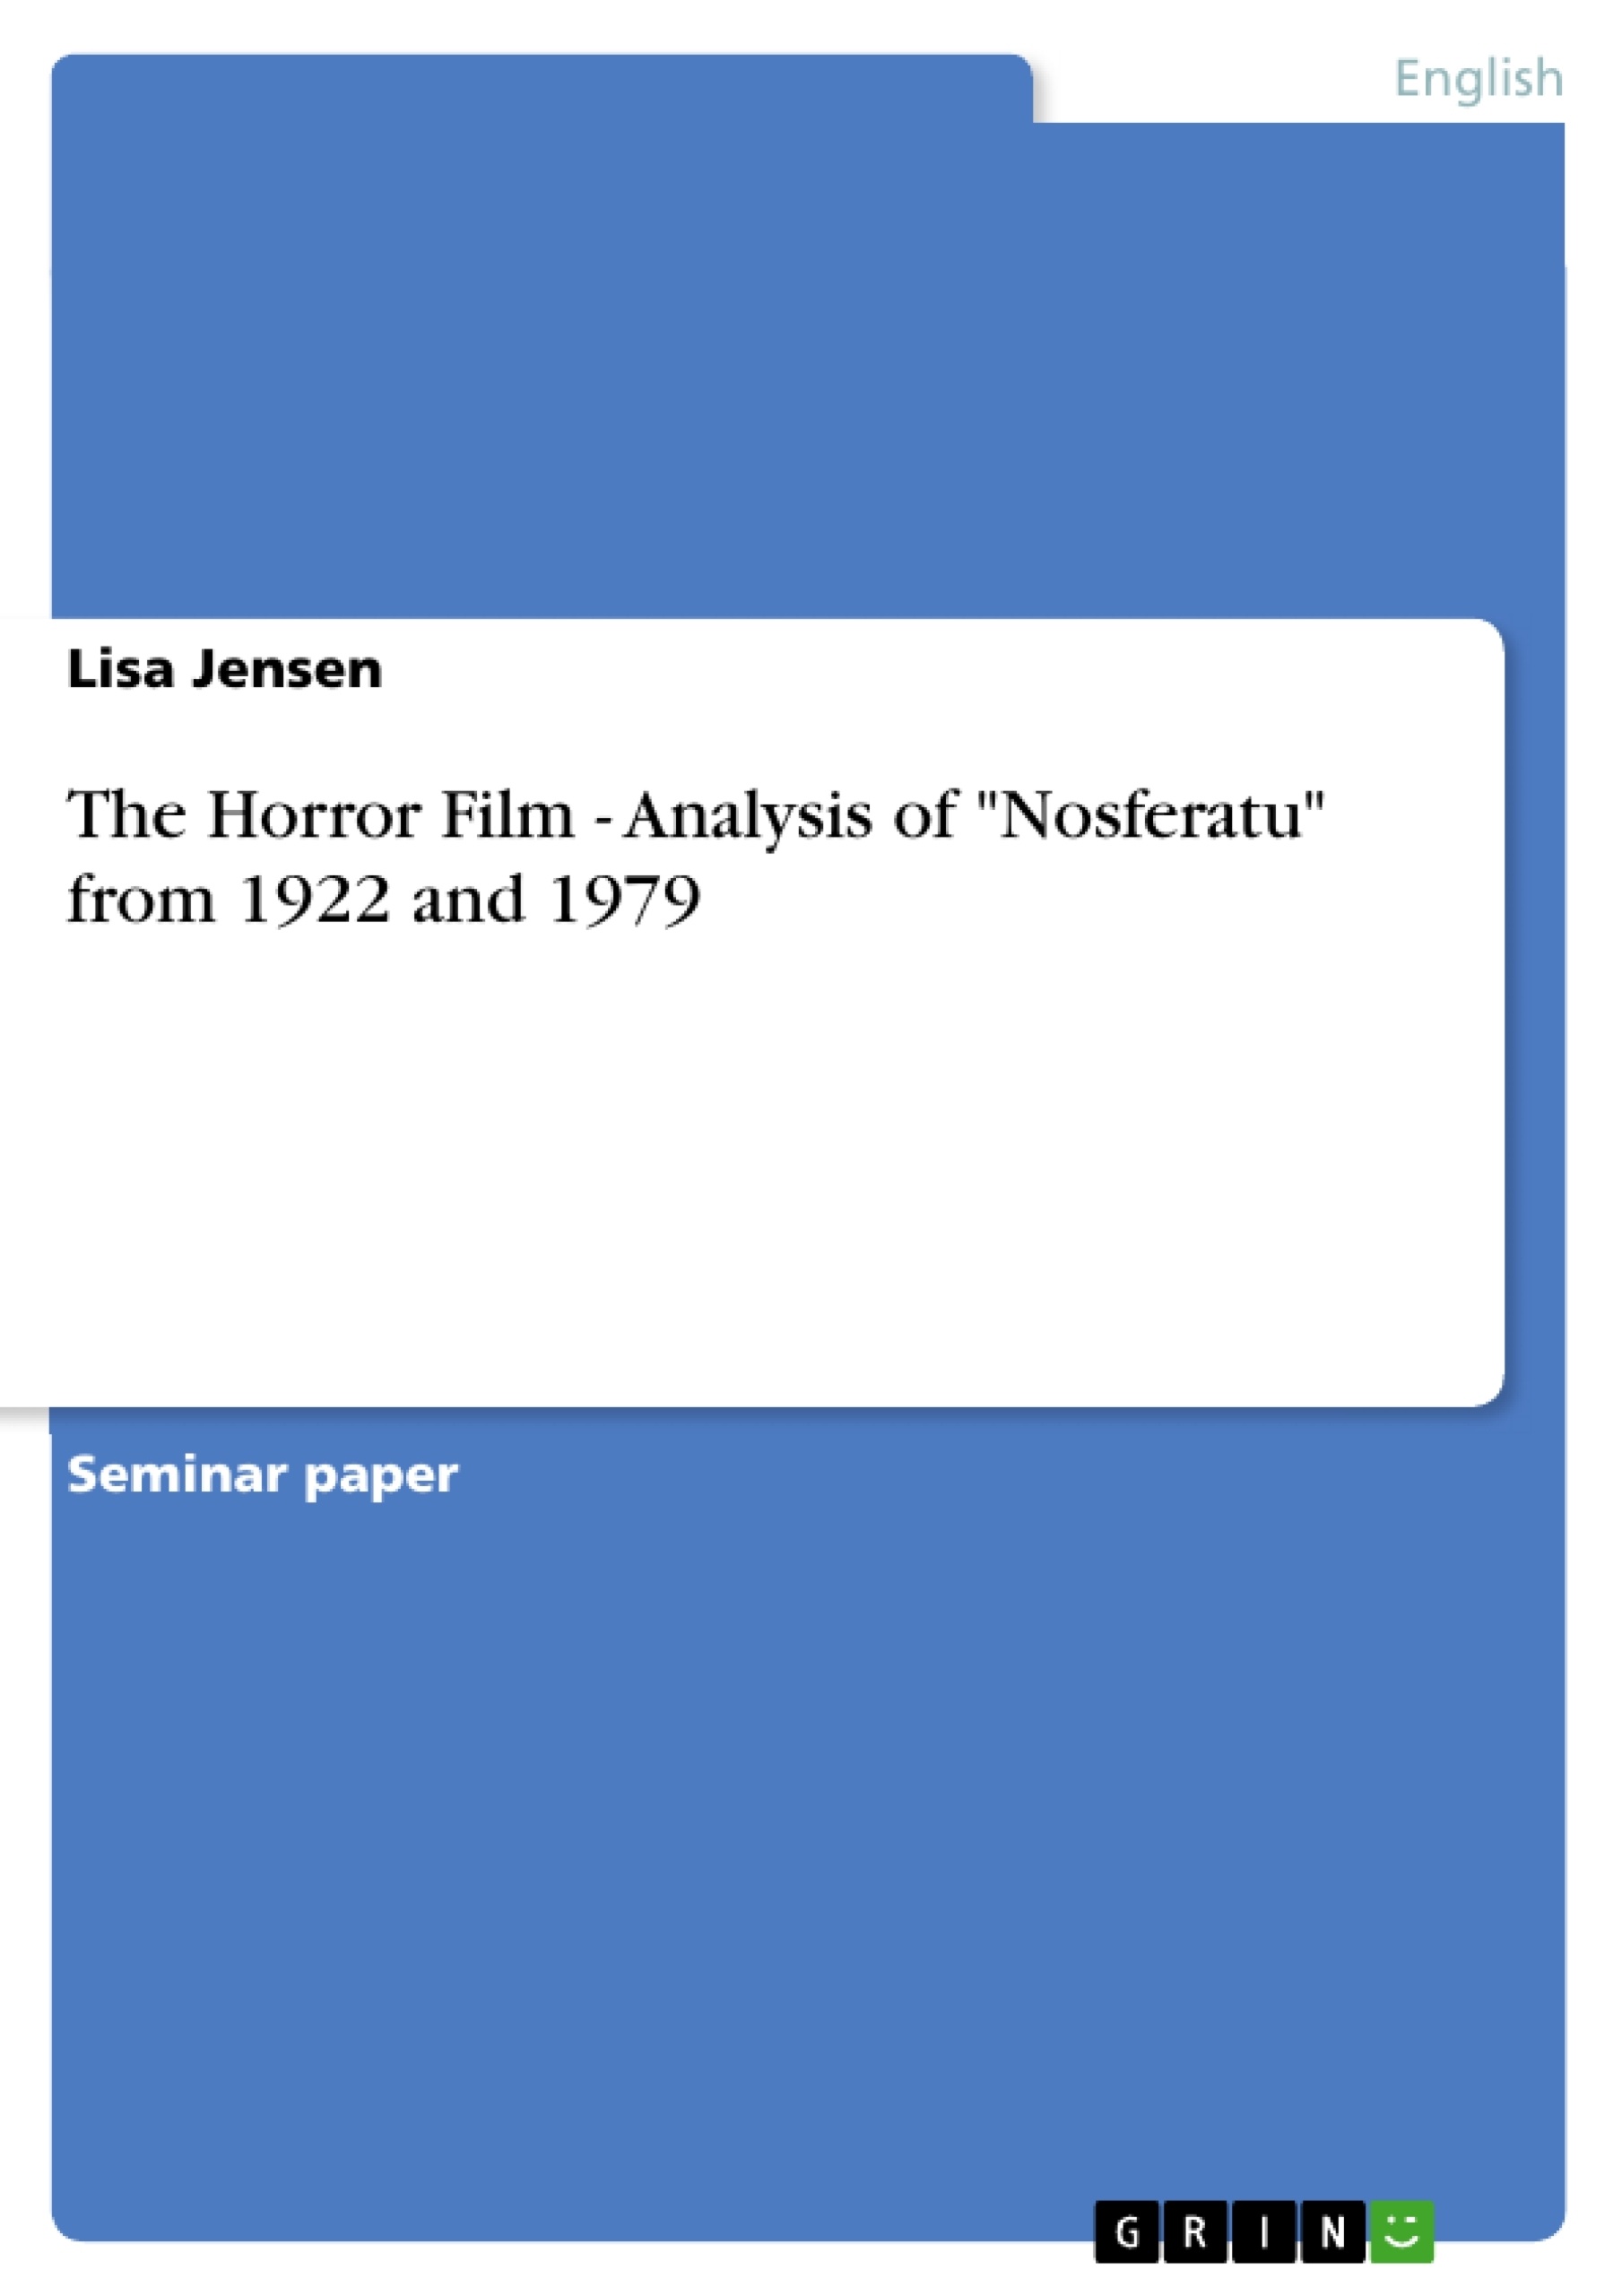 Title: The Horror Film - Analysis of "Nosferatu" from 1922 and 1979